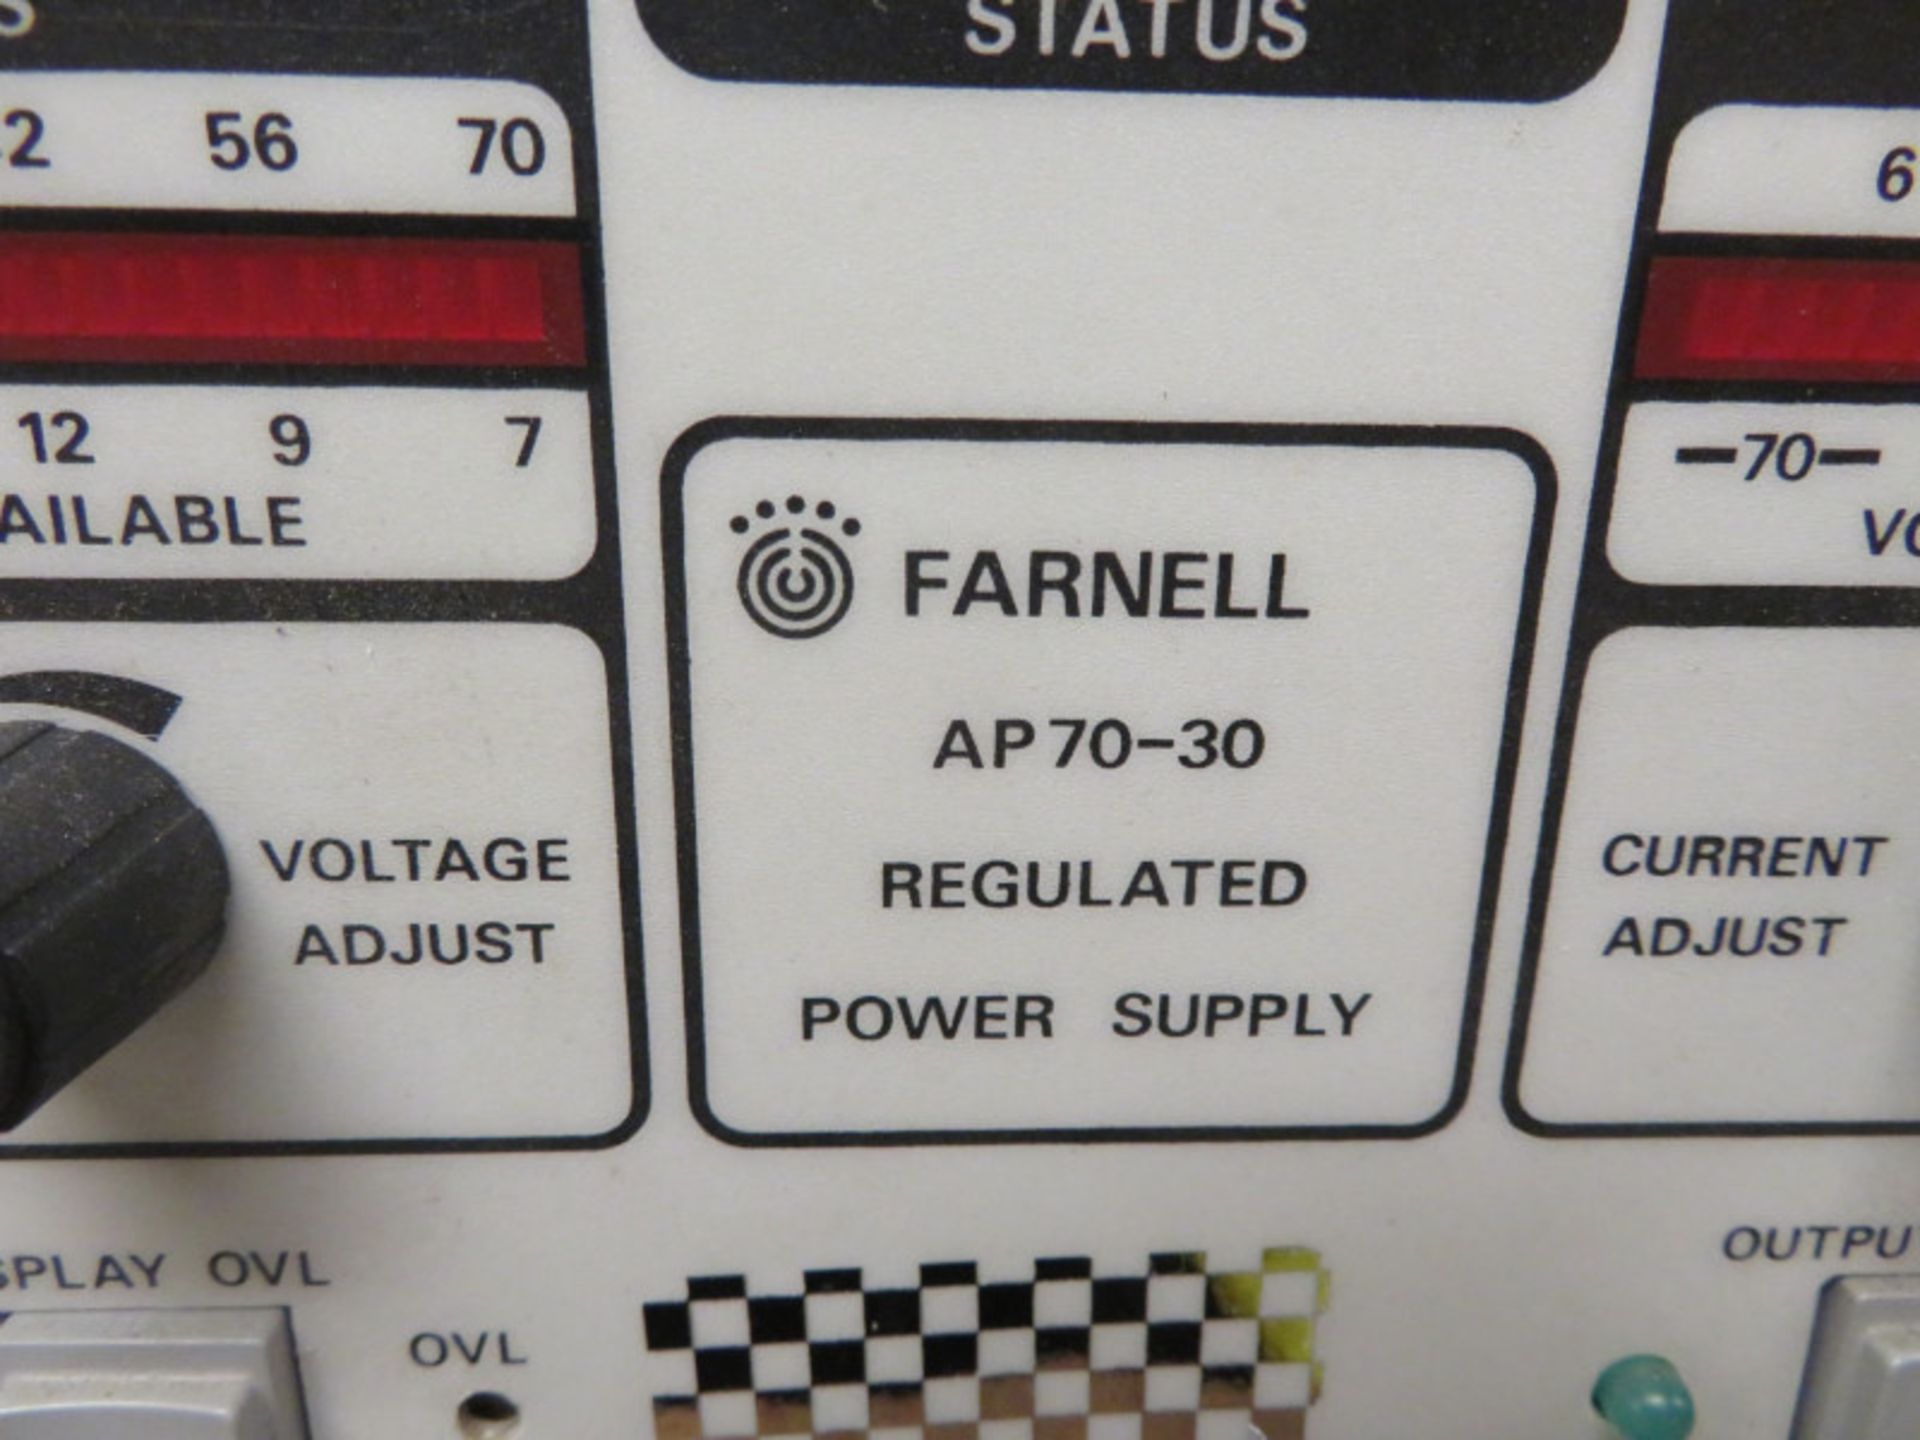 Farnell AP70-30 Regulated Power Supply - Image 2 of 3